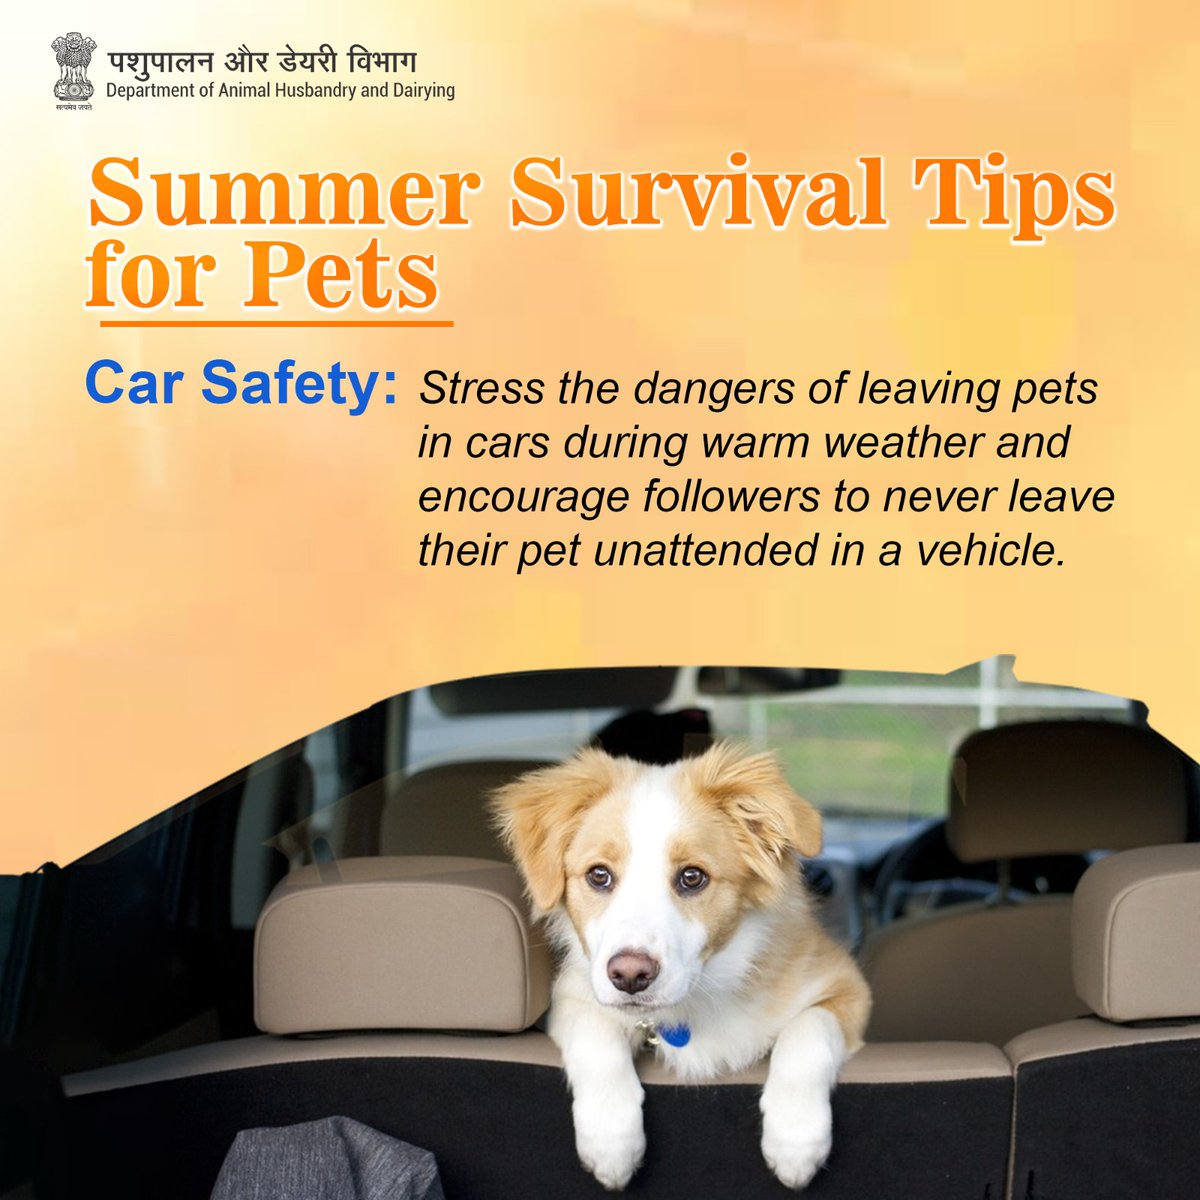 Keep pets cool, keep pets safe. Never leave them alone in a hot car. #KeepPetsCool #KeepPetsSafe #heatwaves #beattheheat